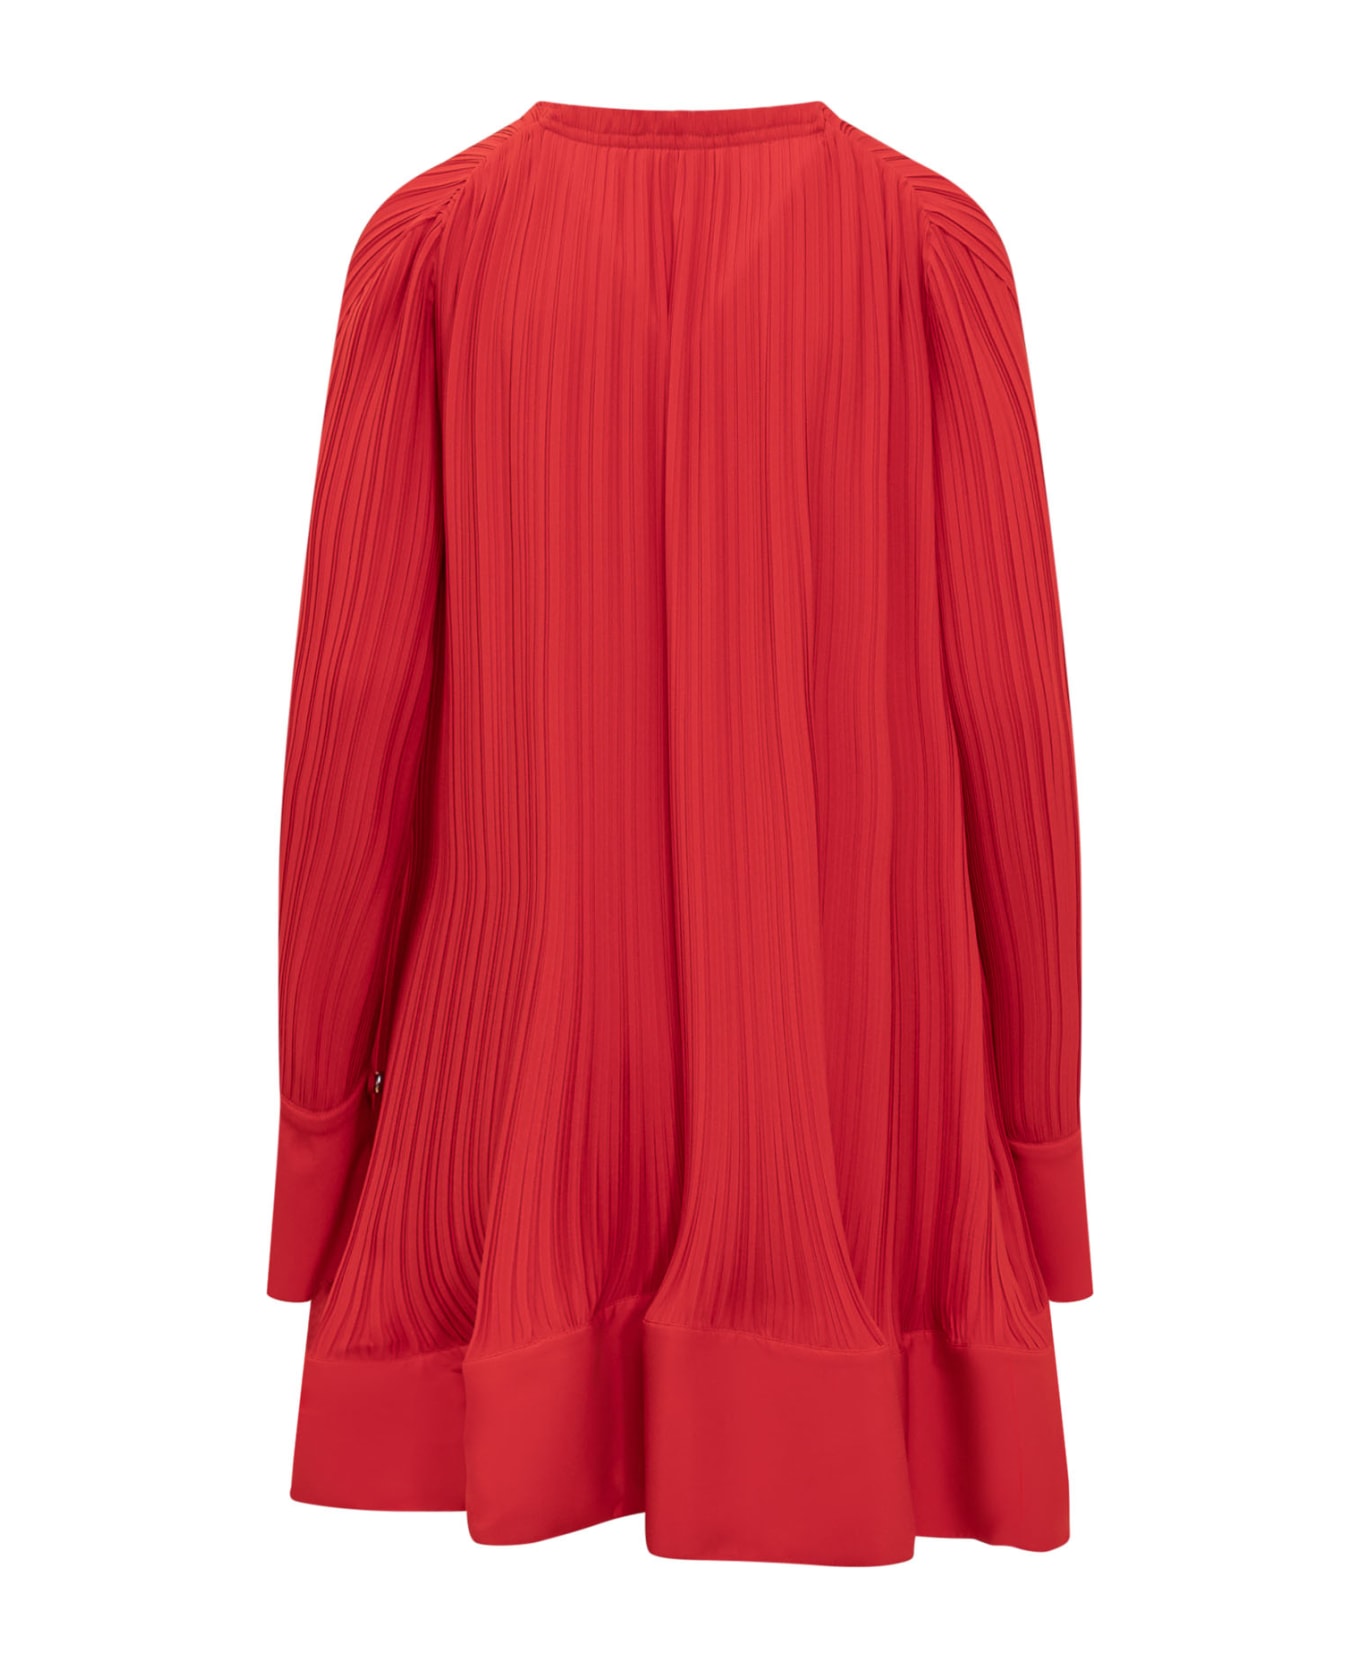 Lanvin 'flared Pleated' Dress - FLAME